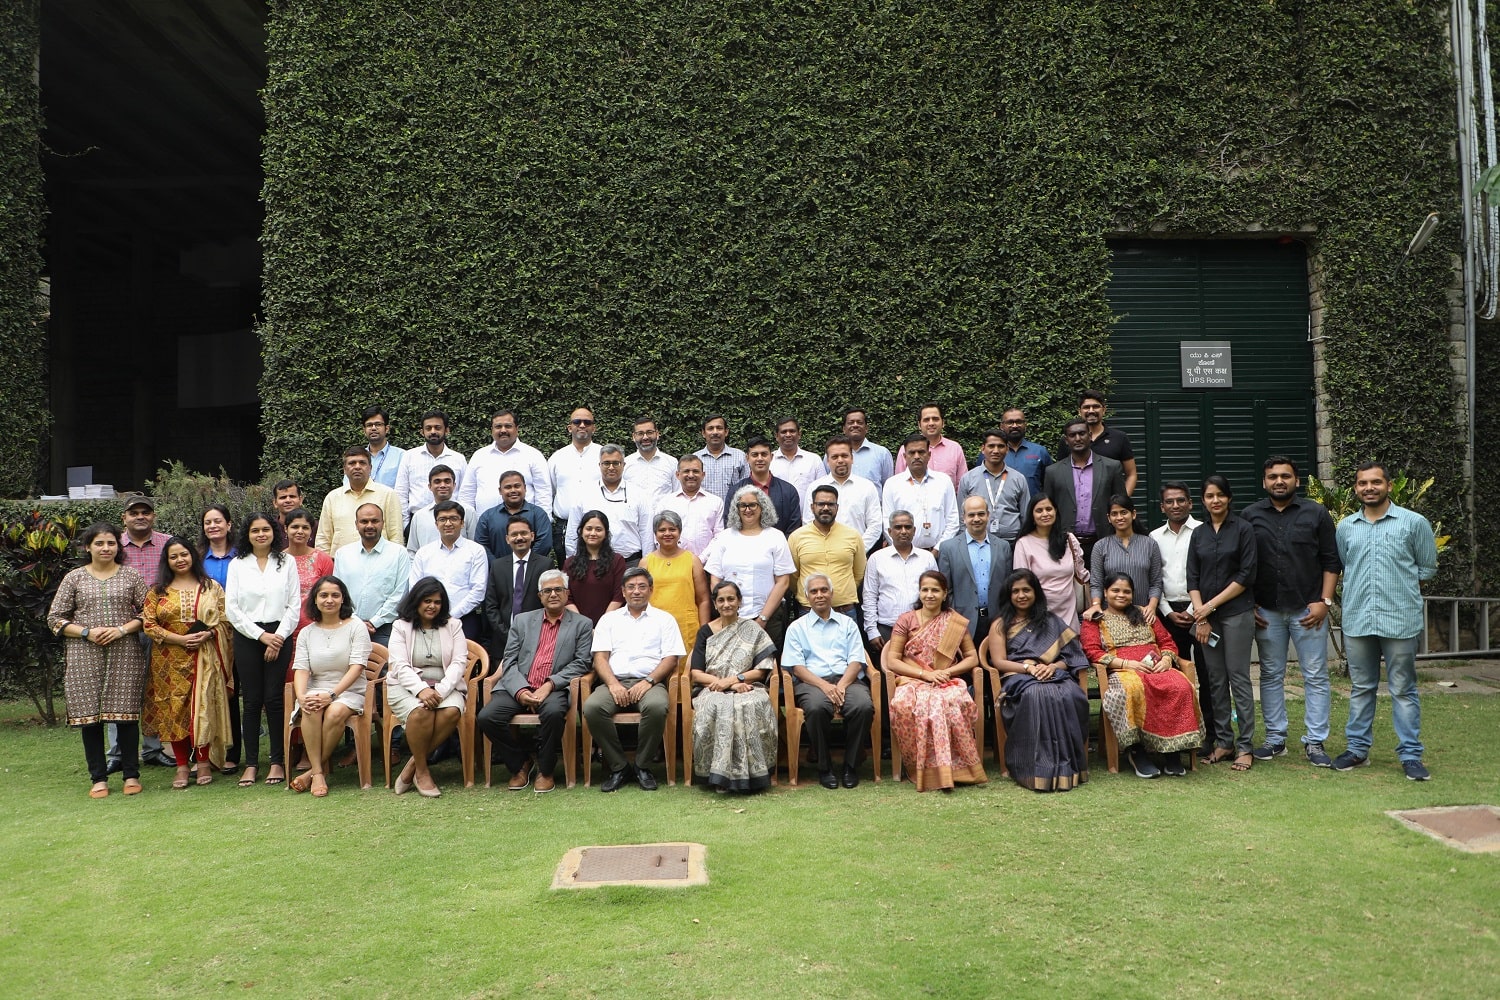 A snapshot of the speakers and participants of the conference.